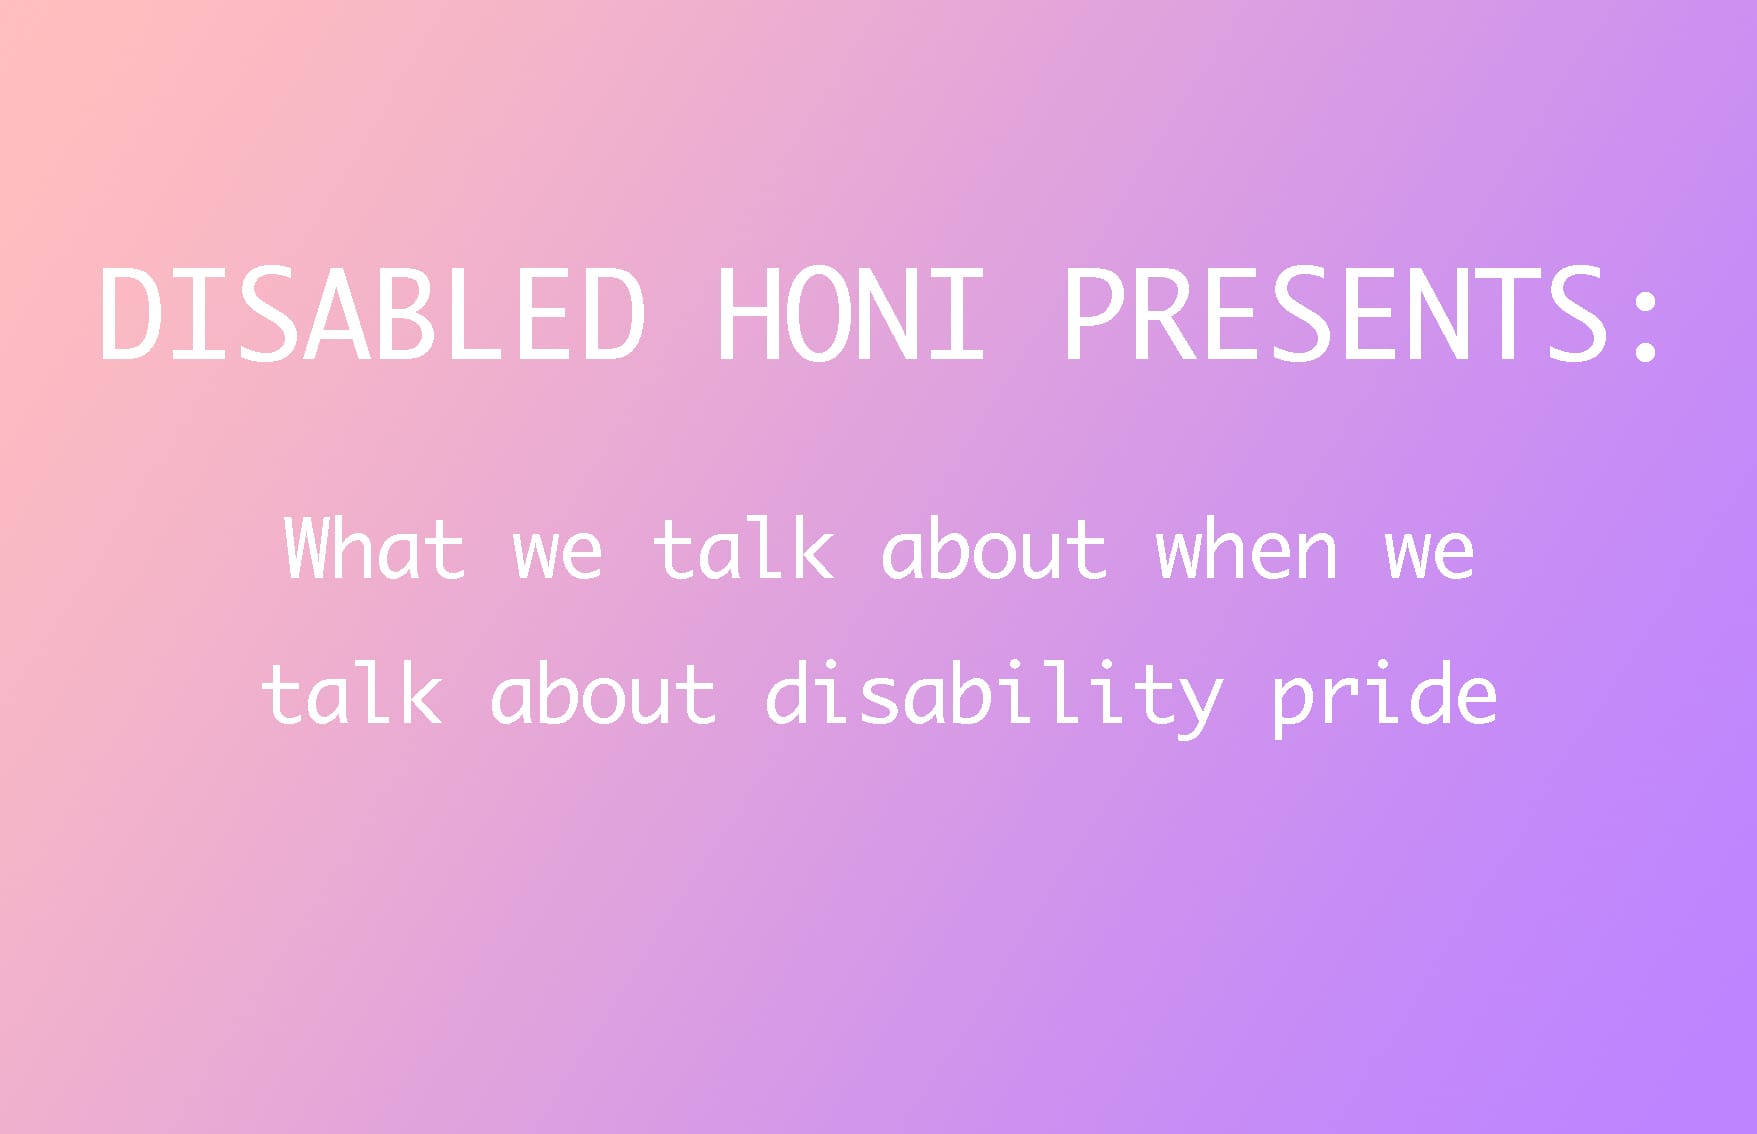 Text reads: Disabled Honi Presents: What we talk about when we talk about disability pride" on a pink and purple background.